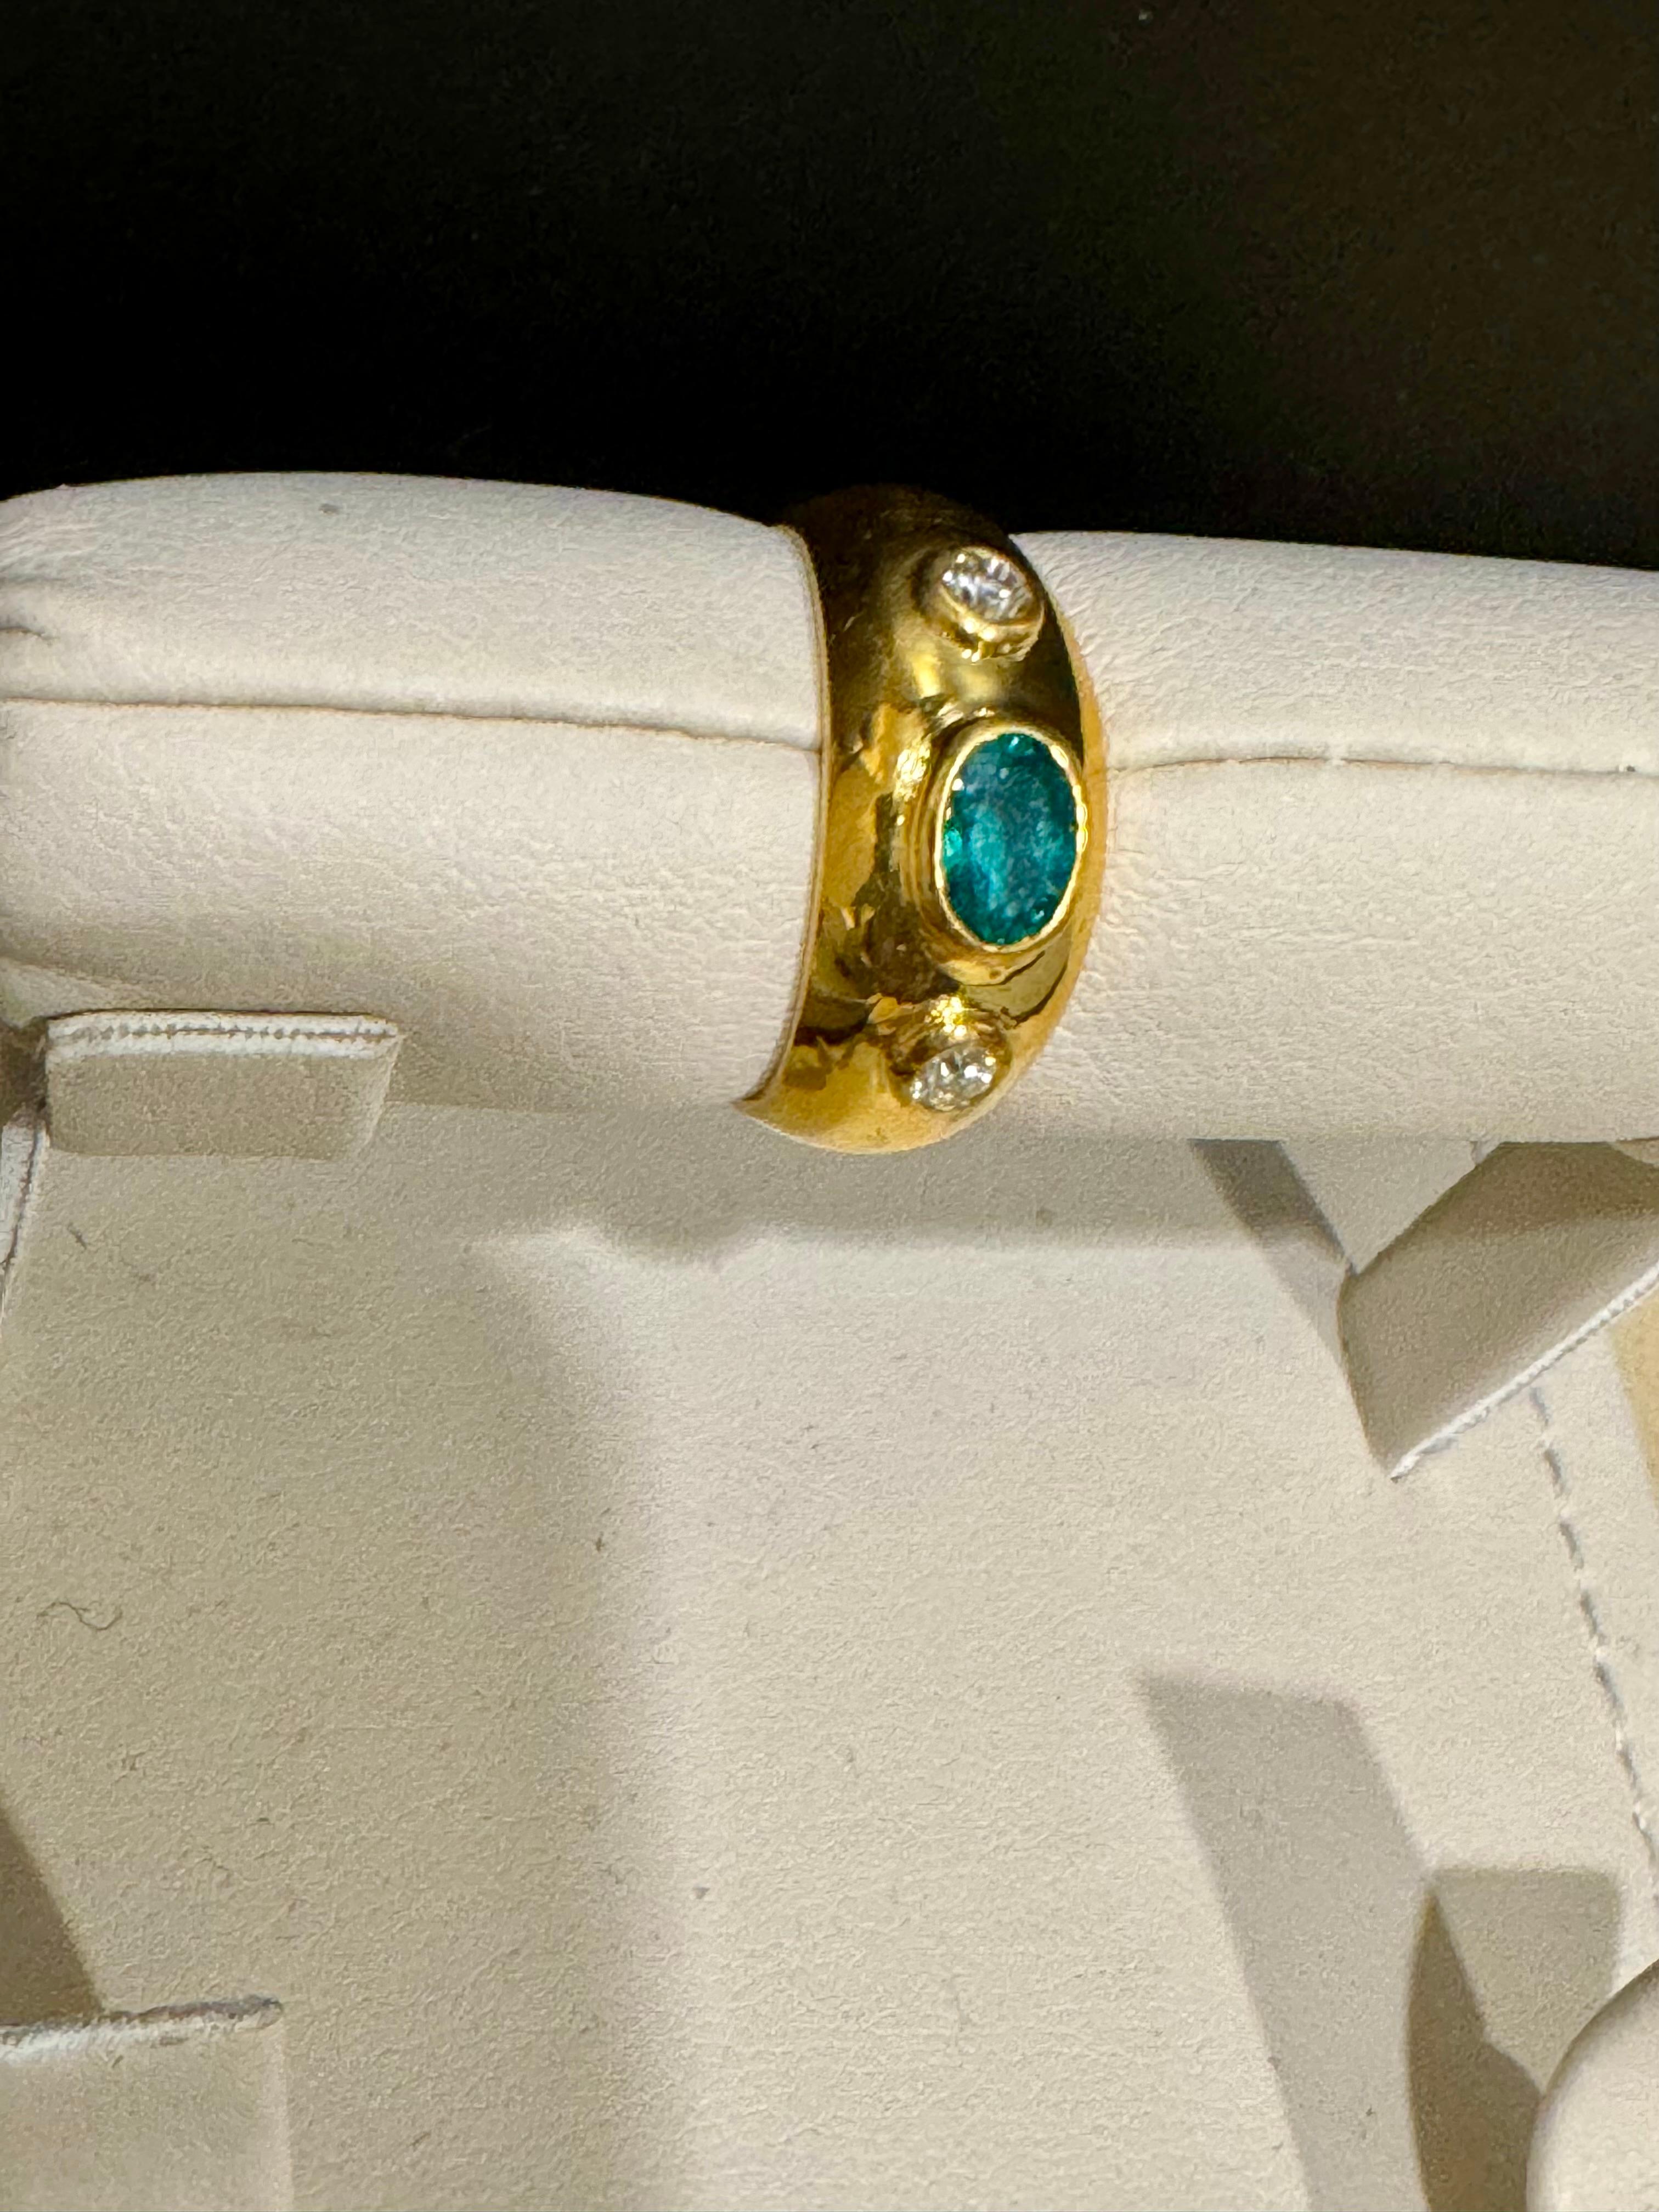 1/2 Ct Oval Emerald  &  Diamond Bezel Set Ring 18 Karat Yellow Gold,  Size 6.5
A nice simple band / ring
 Emerald 0.5 ct, 
Emeralds are very precious , Very Difficult to find and getting more more difficult to find.
Its a bezel set stone , no